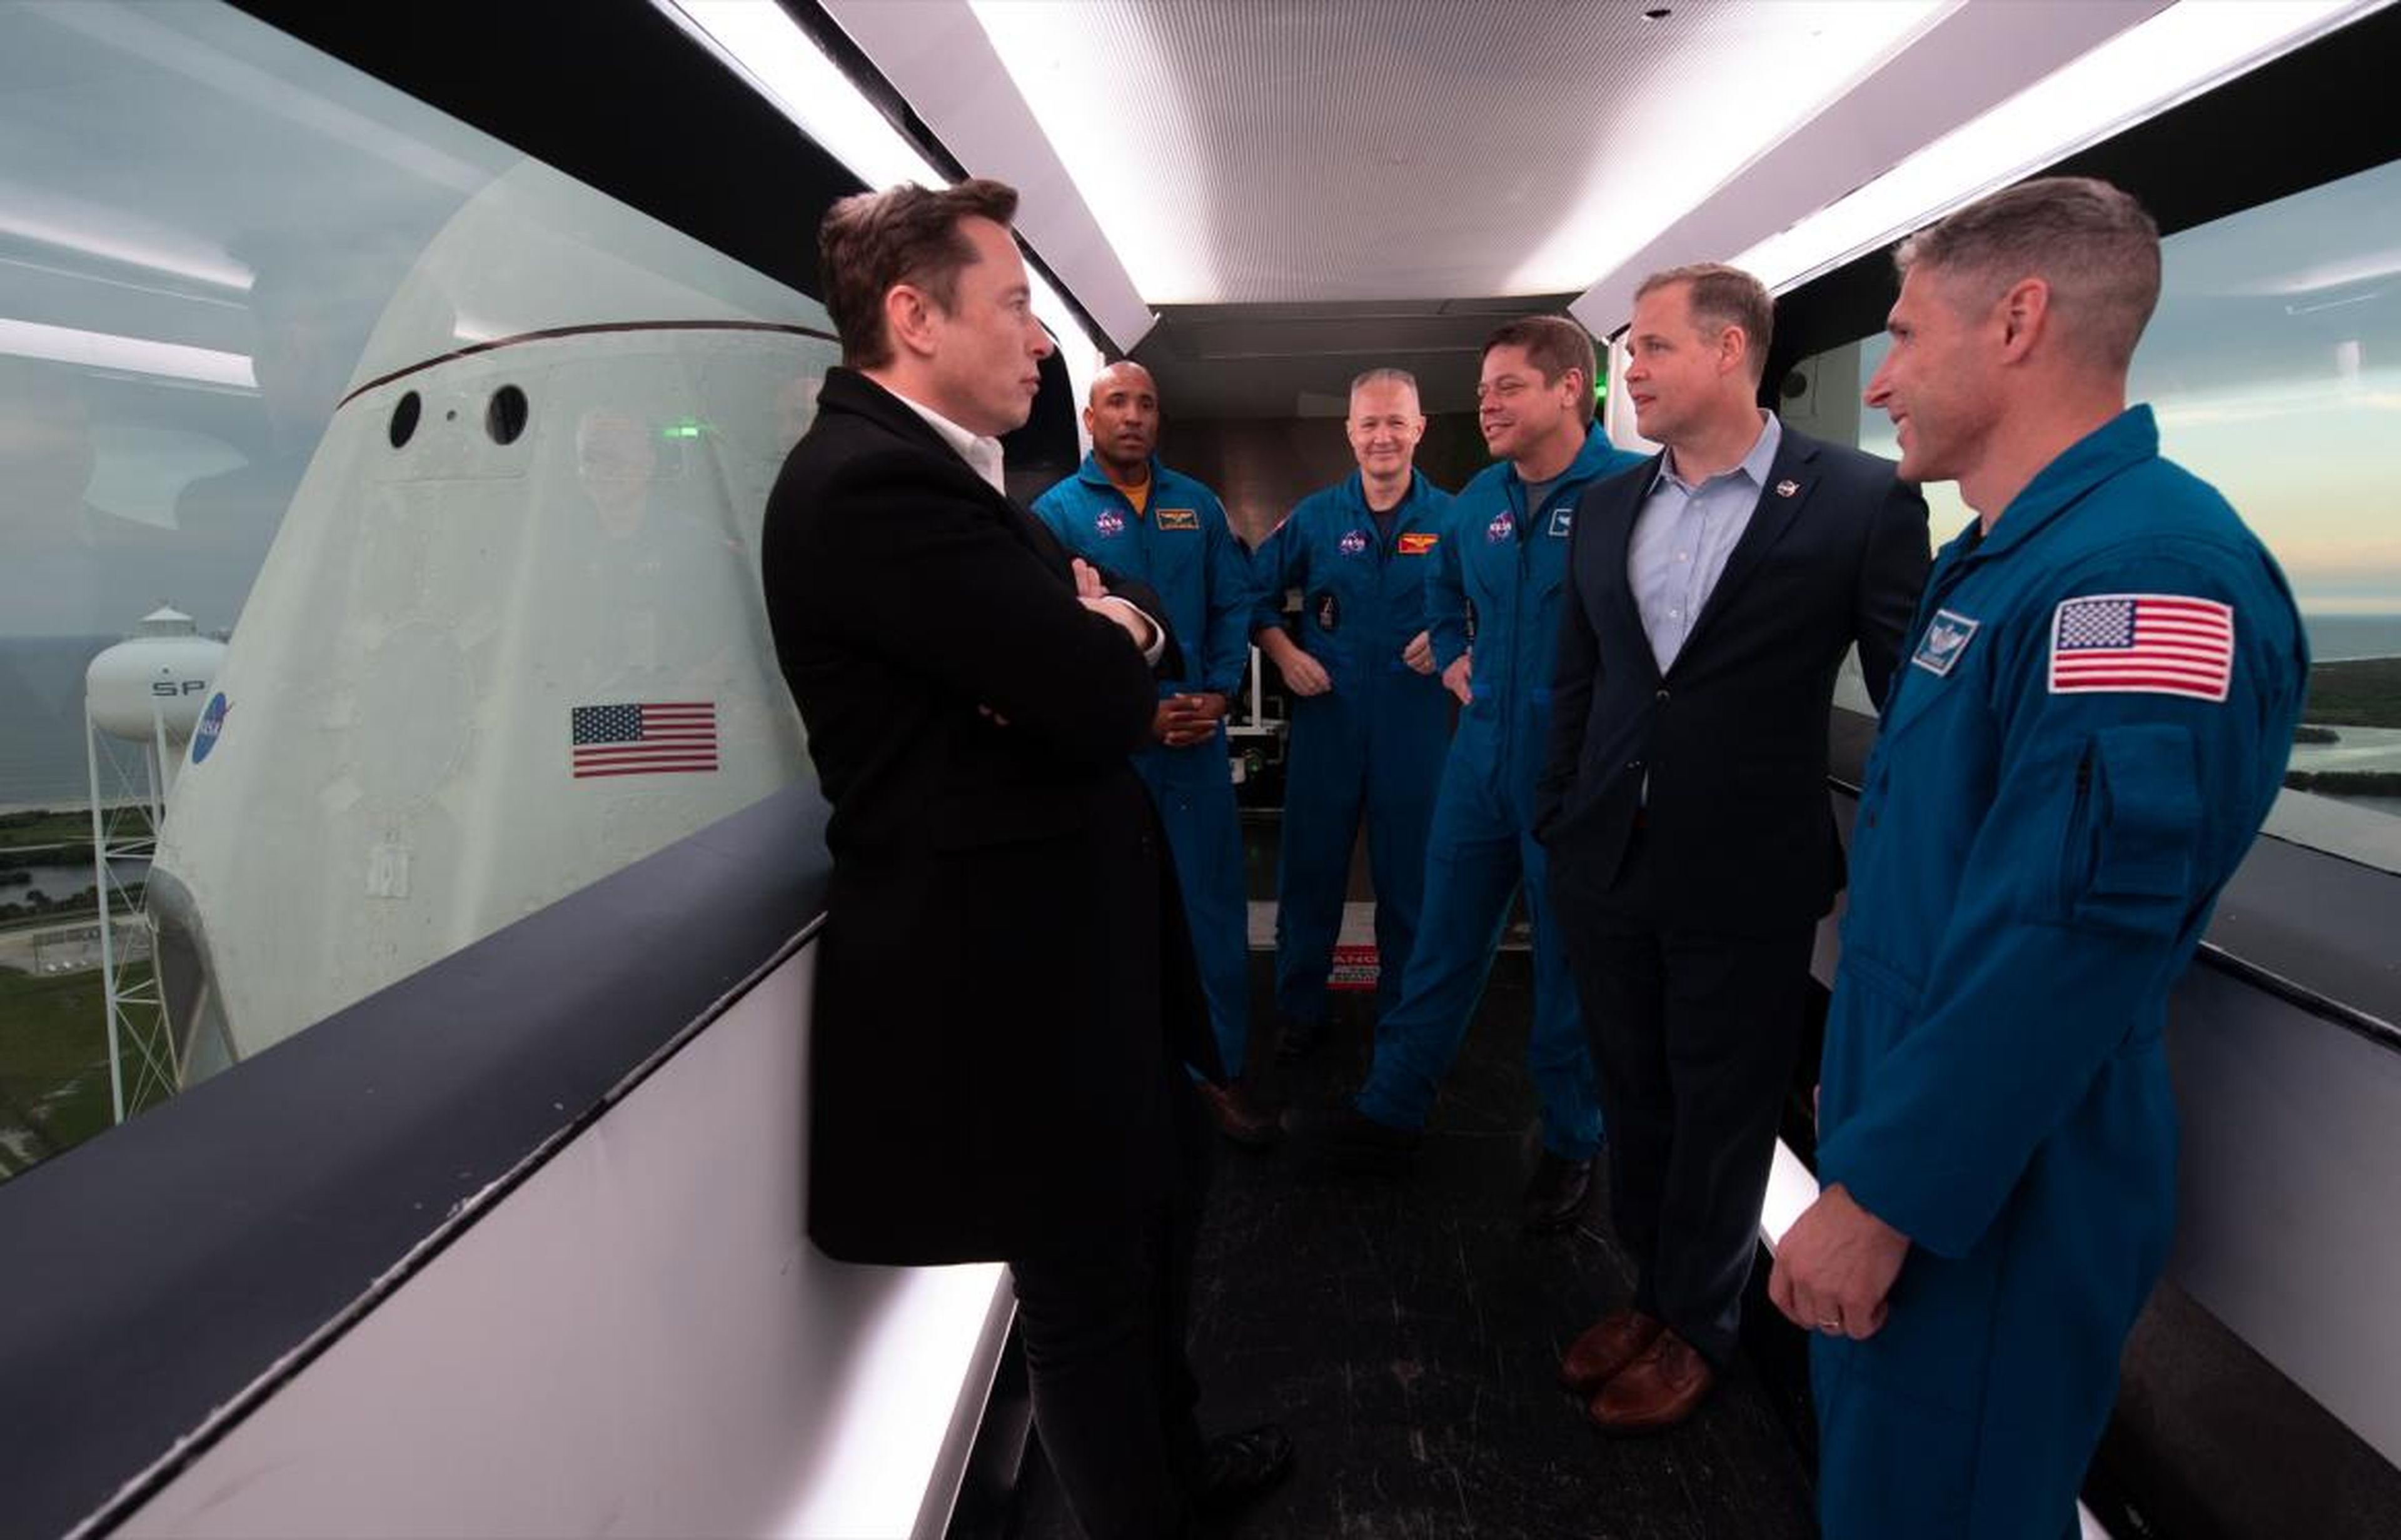 SpaceX founder Elon Musk (left), NASA astronauts Victor Glover, Doug Hurley, Bob Behnken, NASA Administrator Jim Bridenstine, and NASA astronaut Mike Hopkins are seen inside the crew access arm with the SpaceX Crew Dragon spacecraft visible behind them